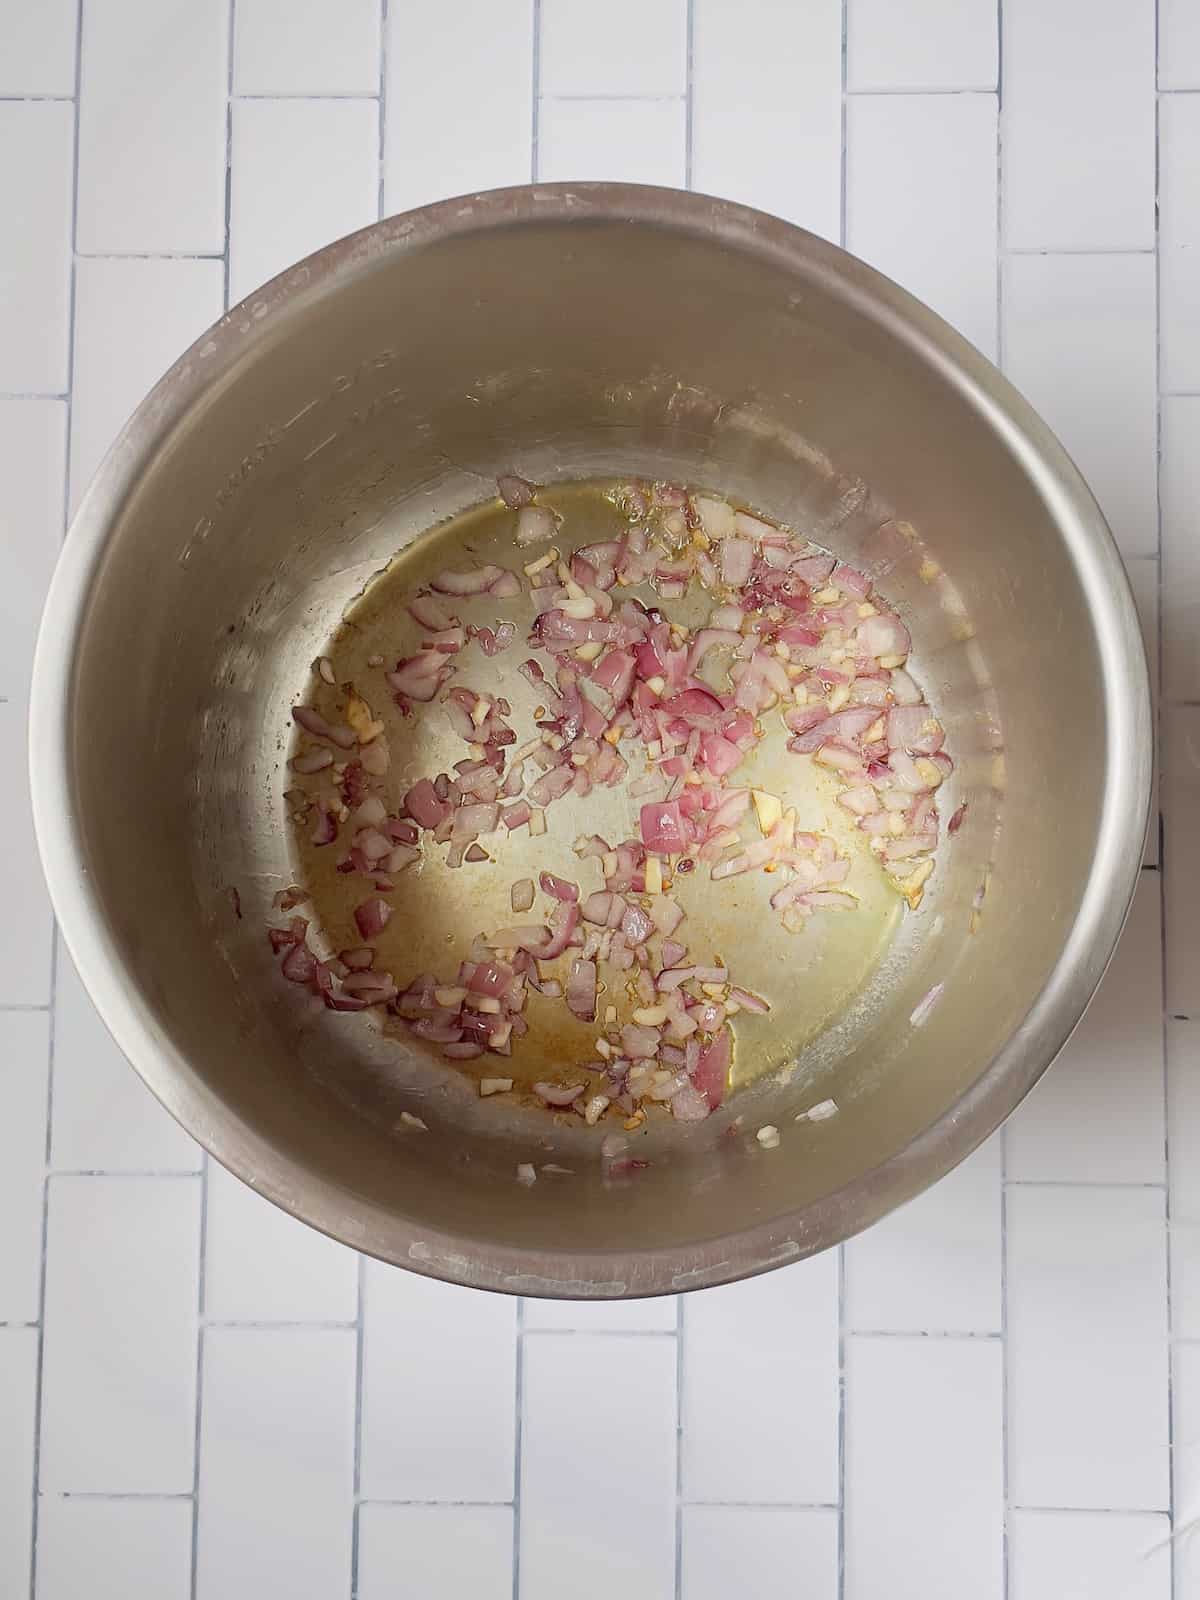 onions and garlic cooking in a pressure cooker